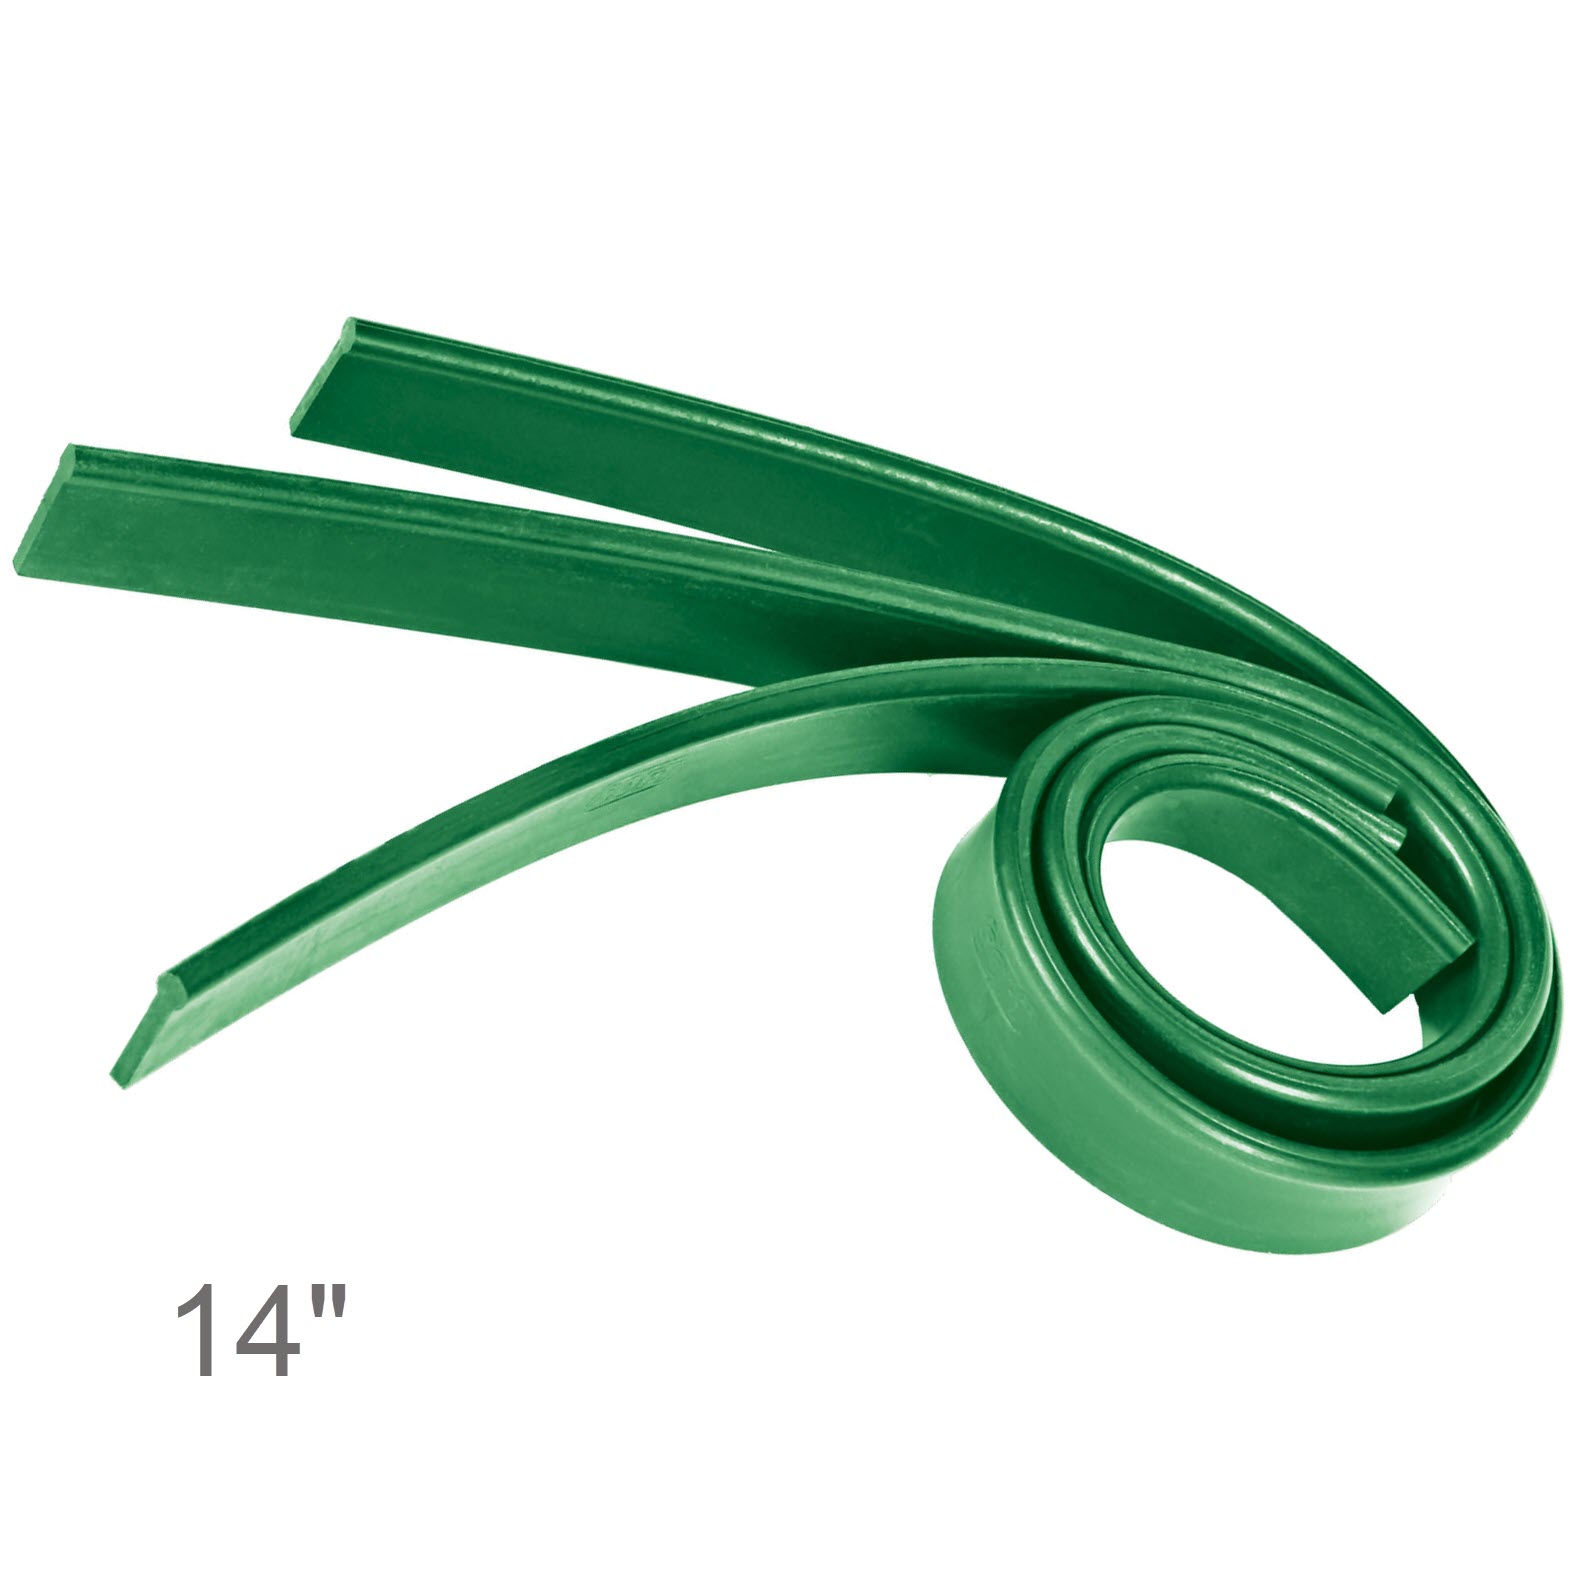 Unger ErgoTec squeegee with green rubber 14 / 35cm - PWSE24